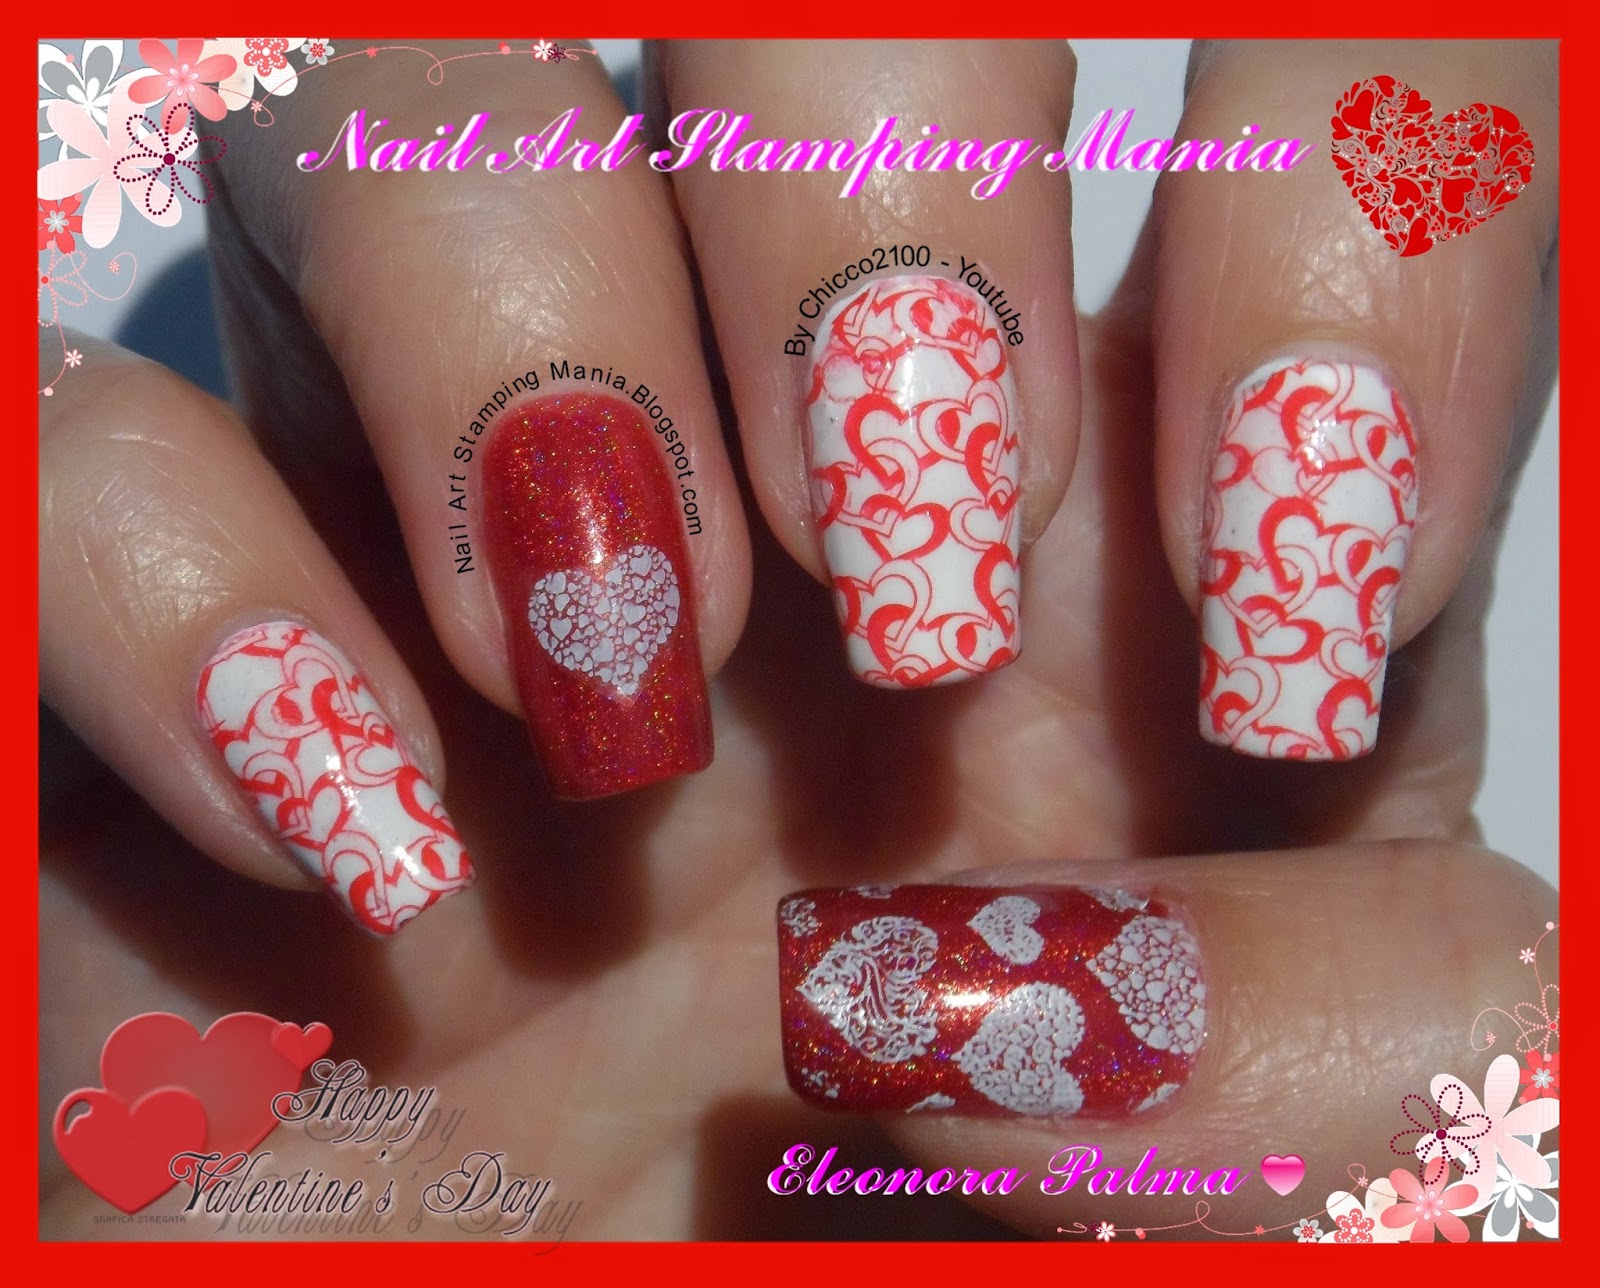 2. Nail Art Stamping Mania Facebook Page - wide 3